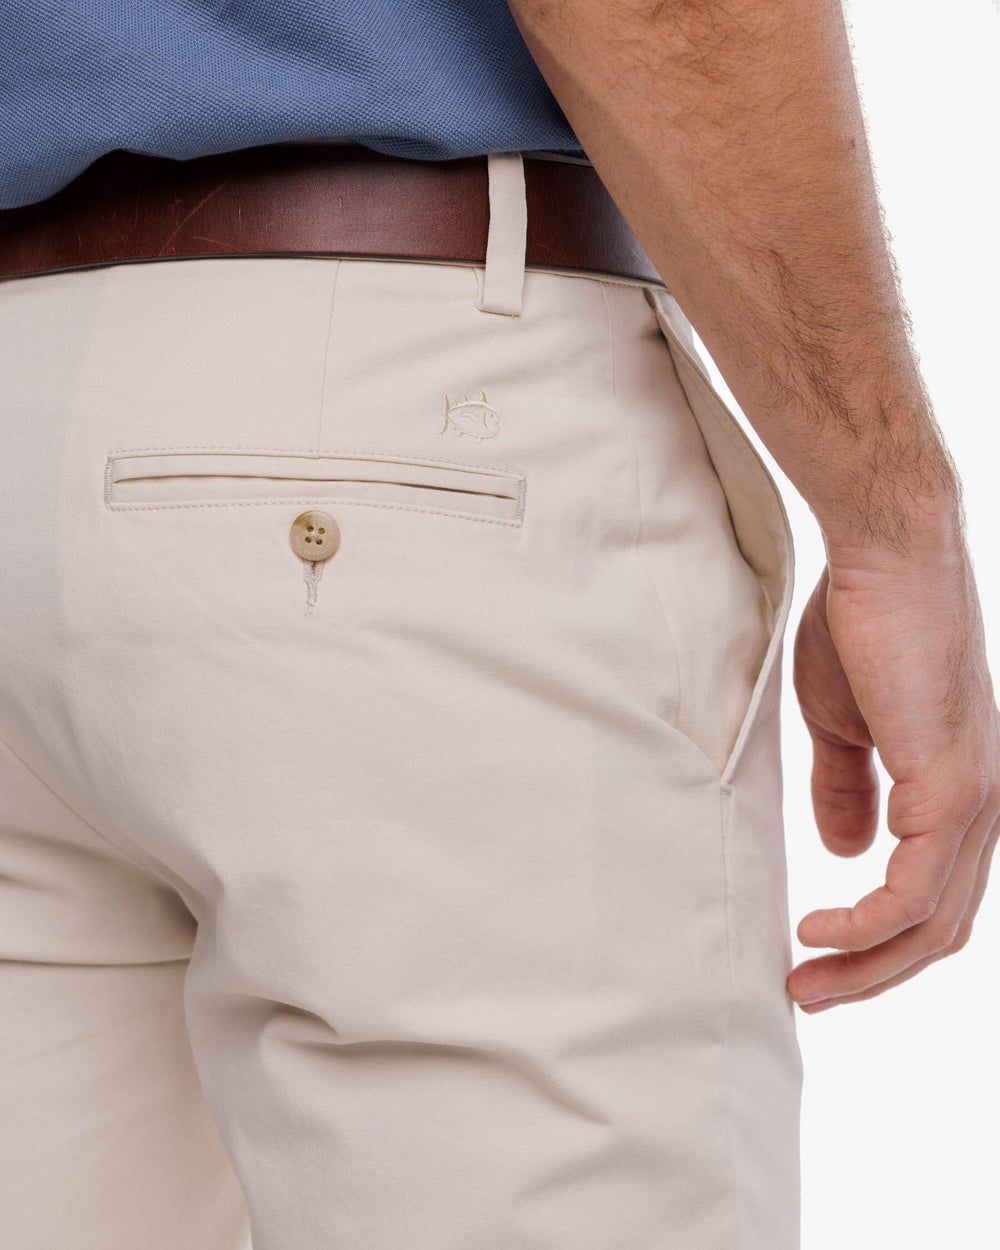 The detail view of the Southern Tide Channel Marker Chino Pant by Southern Tide - Light Khaki